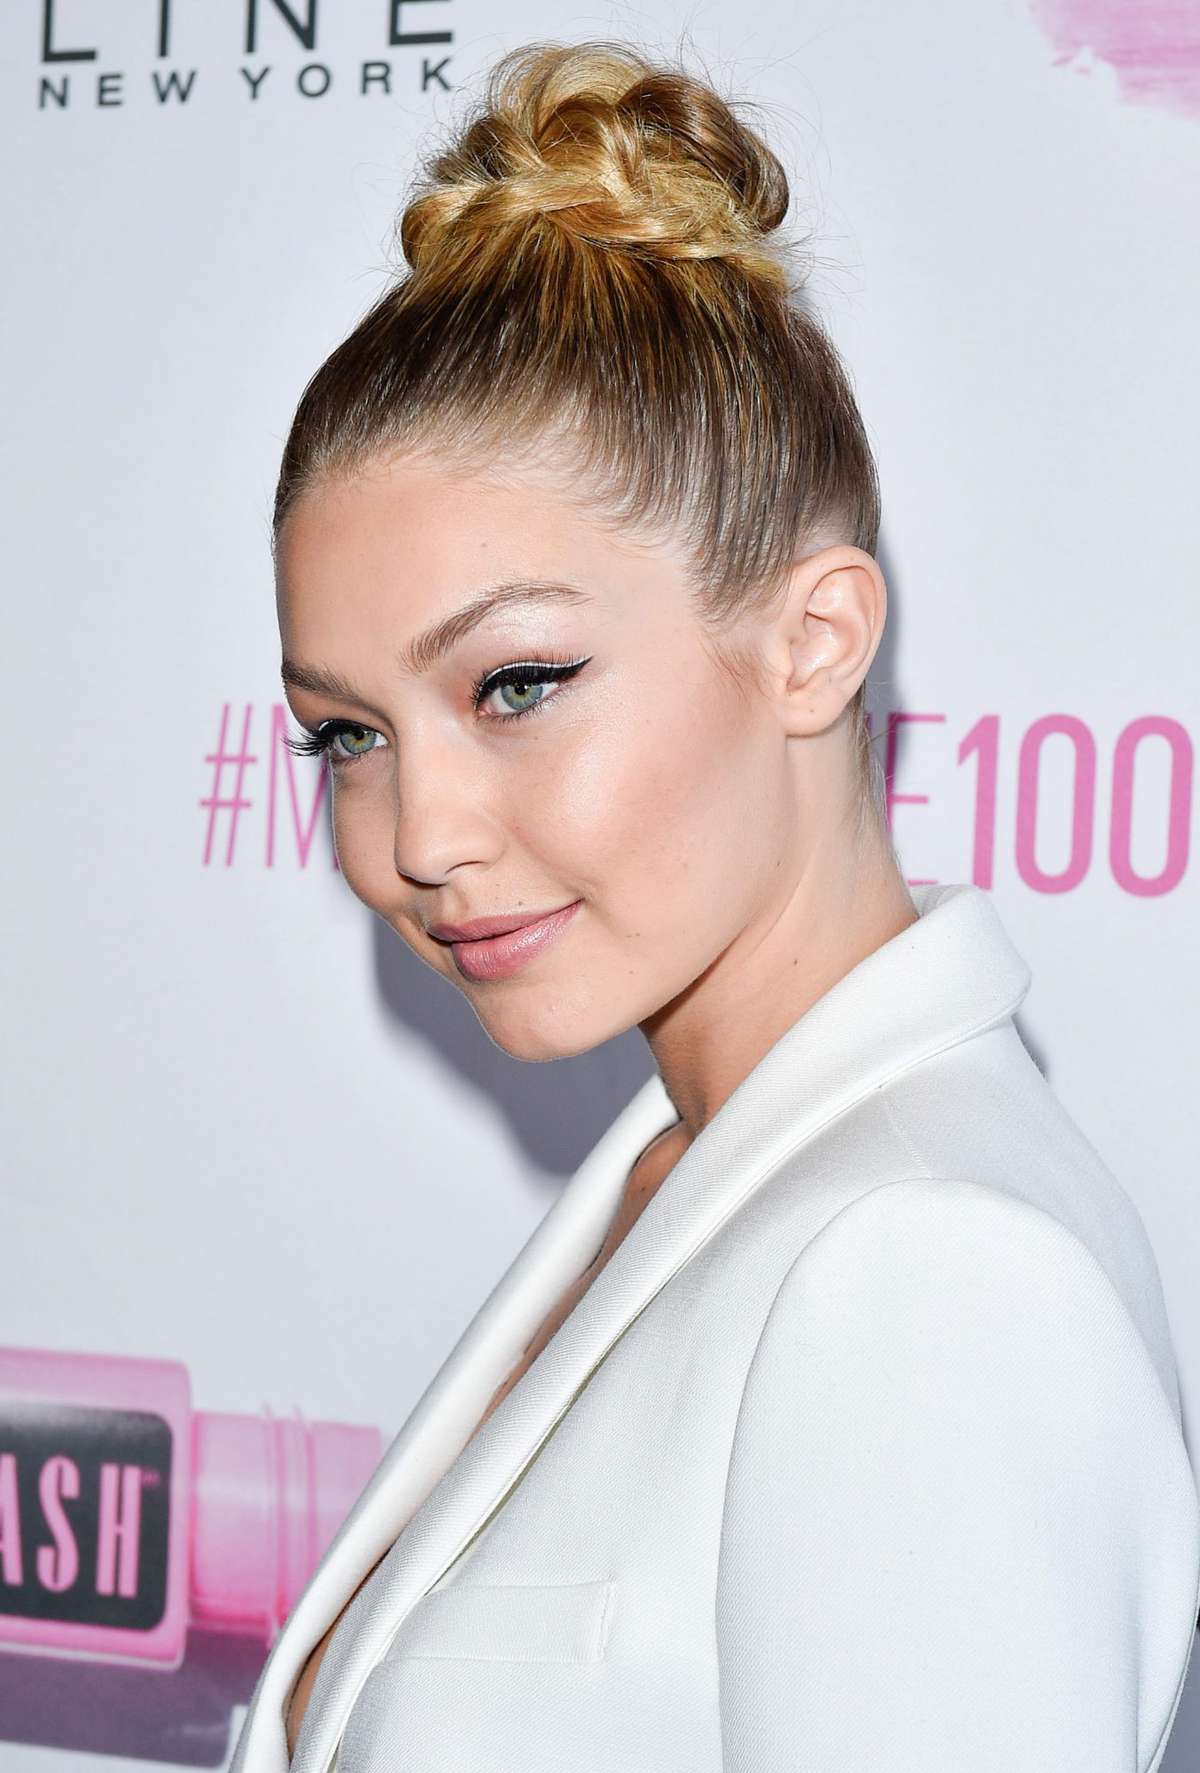 Maybelline New York 100th Anniversary Party With Spokesmodel Gigi Hadid In Toronto